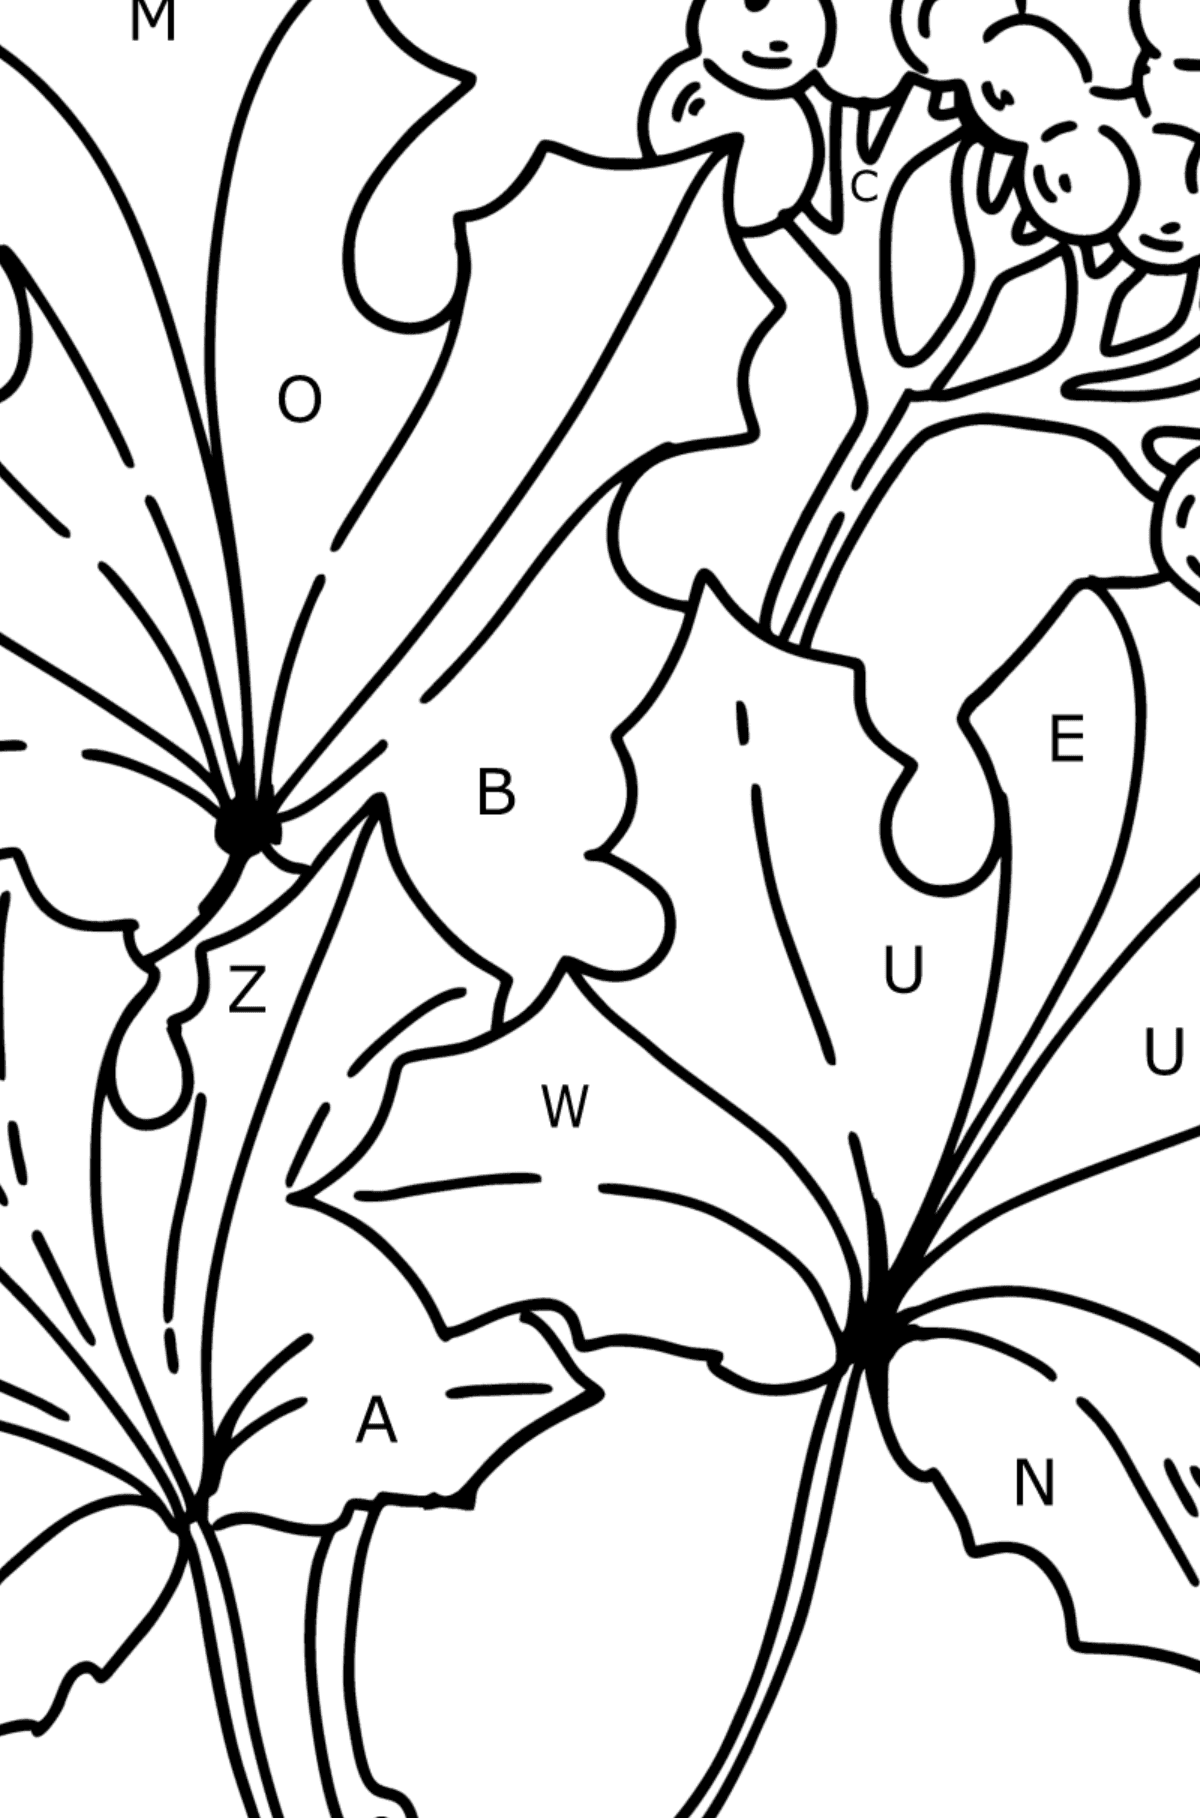 Coloring page - Maple Leaves and Elderberries - Coloring by Letters for Kids